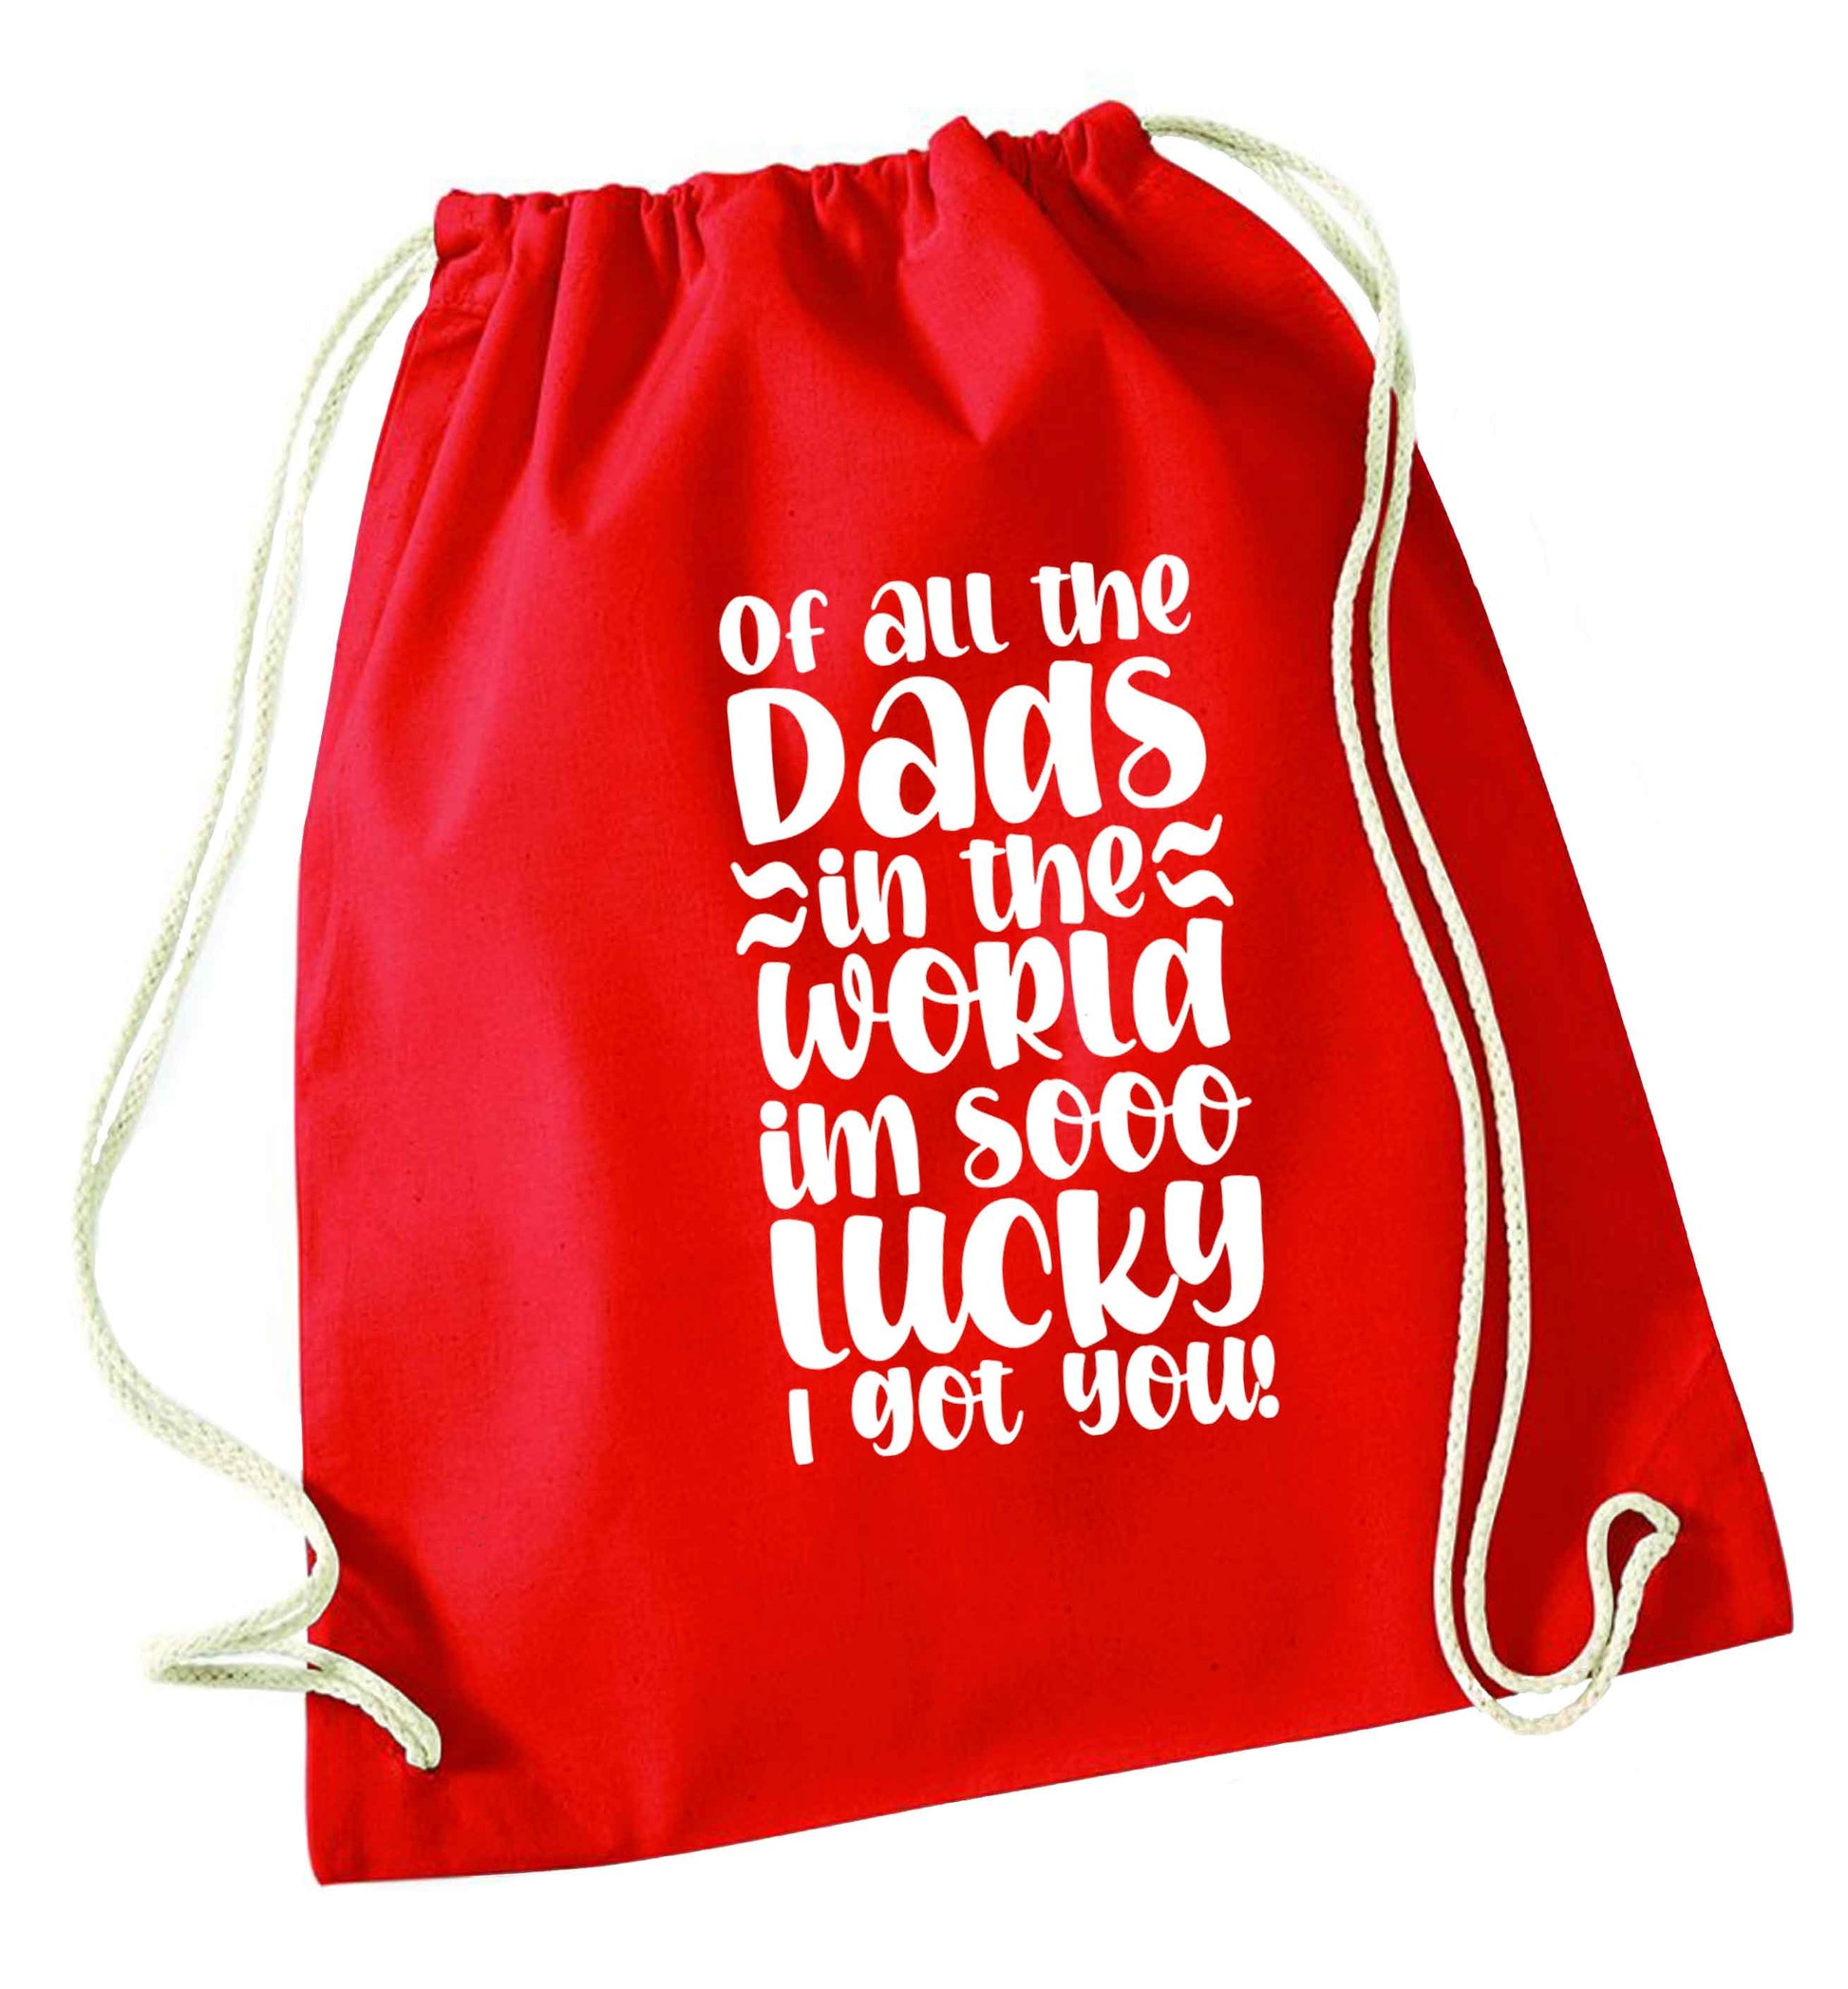 Of all the Dads in the world I'm so lucky I got you red drawstring bag 